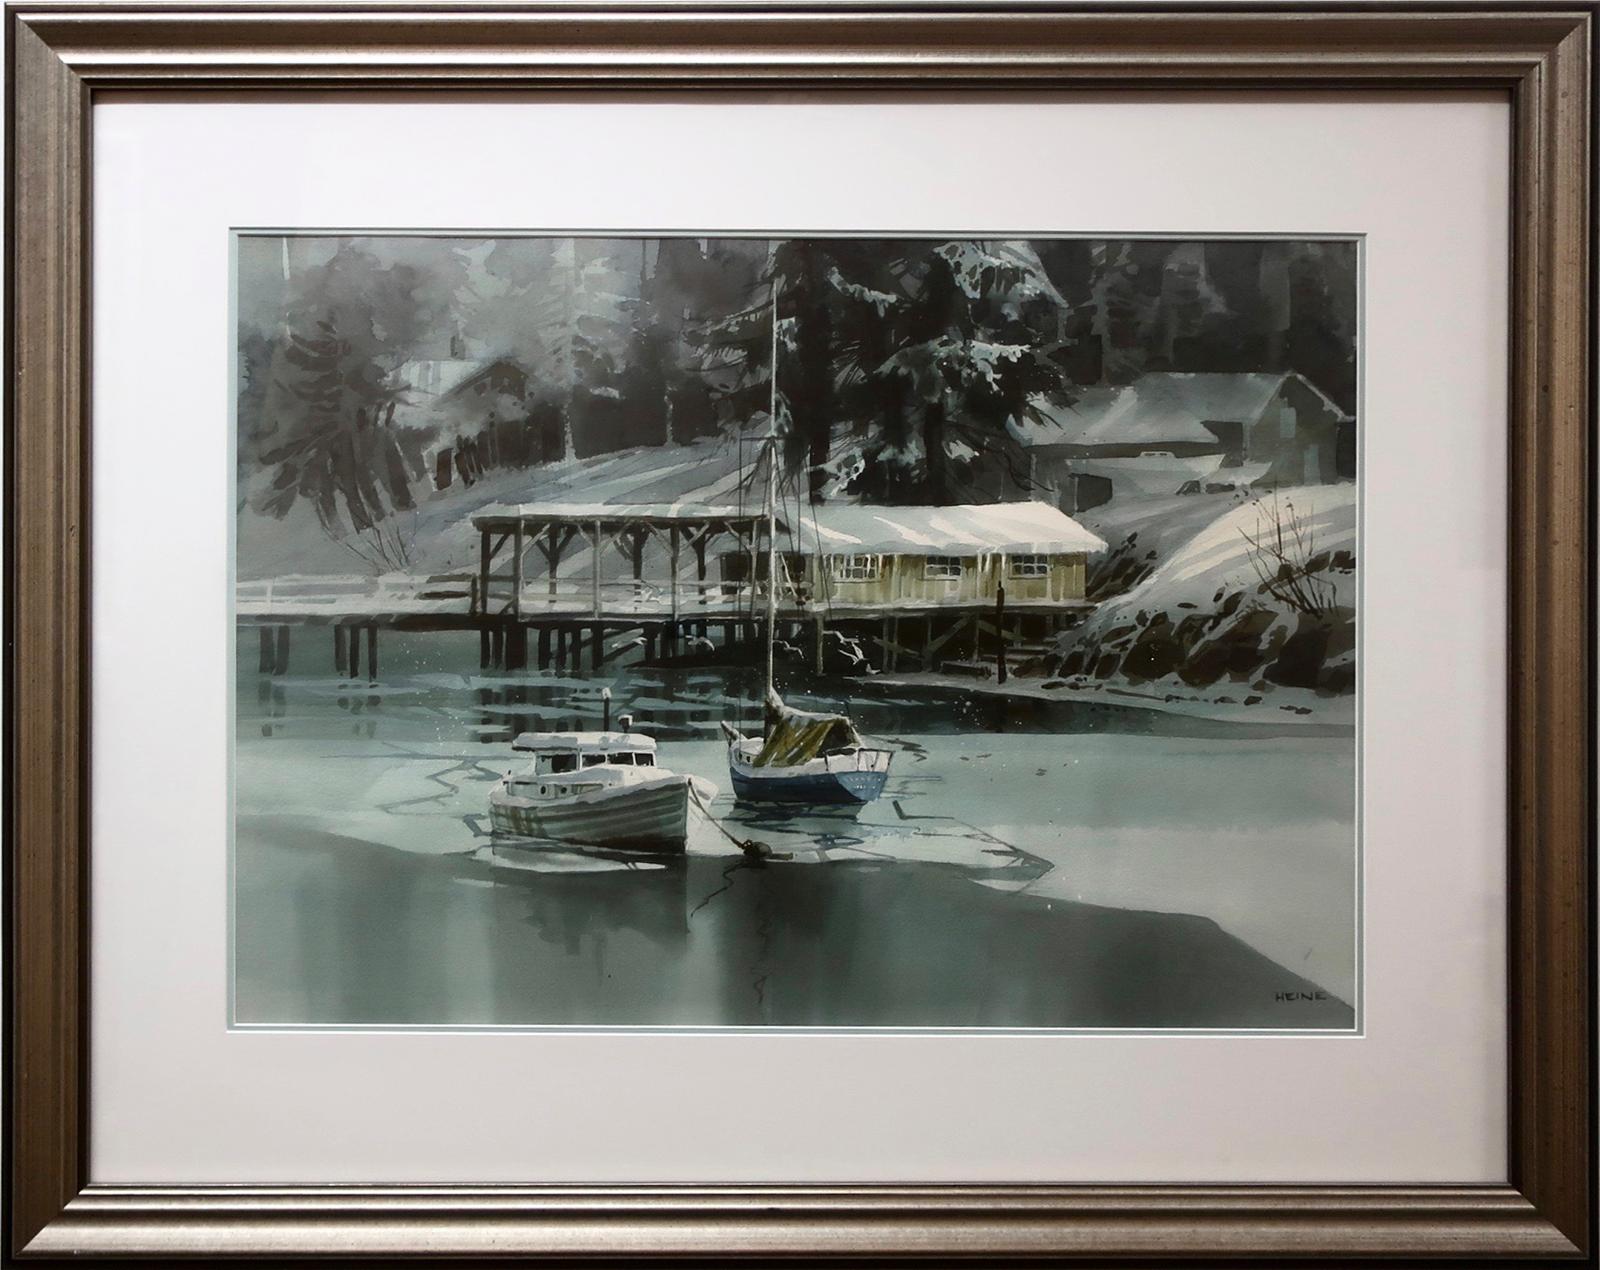 Harry Heine (1924-2004) - Untitled (Boats At Rest - Winter)